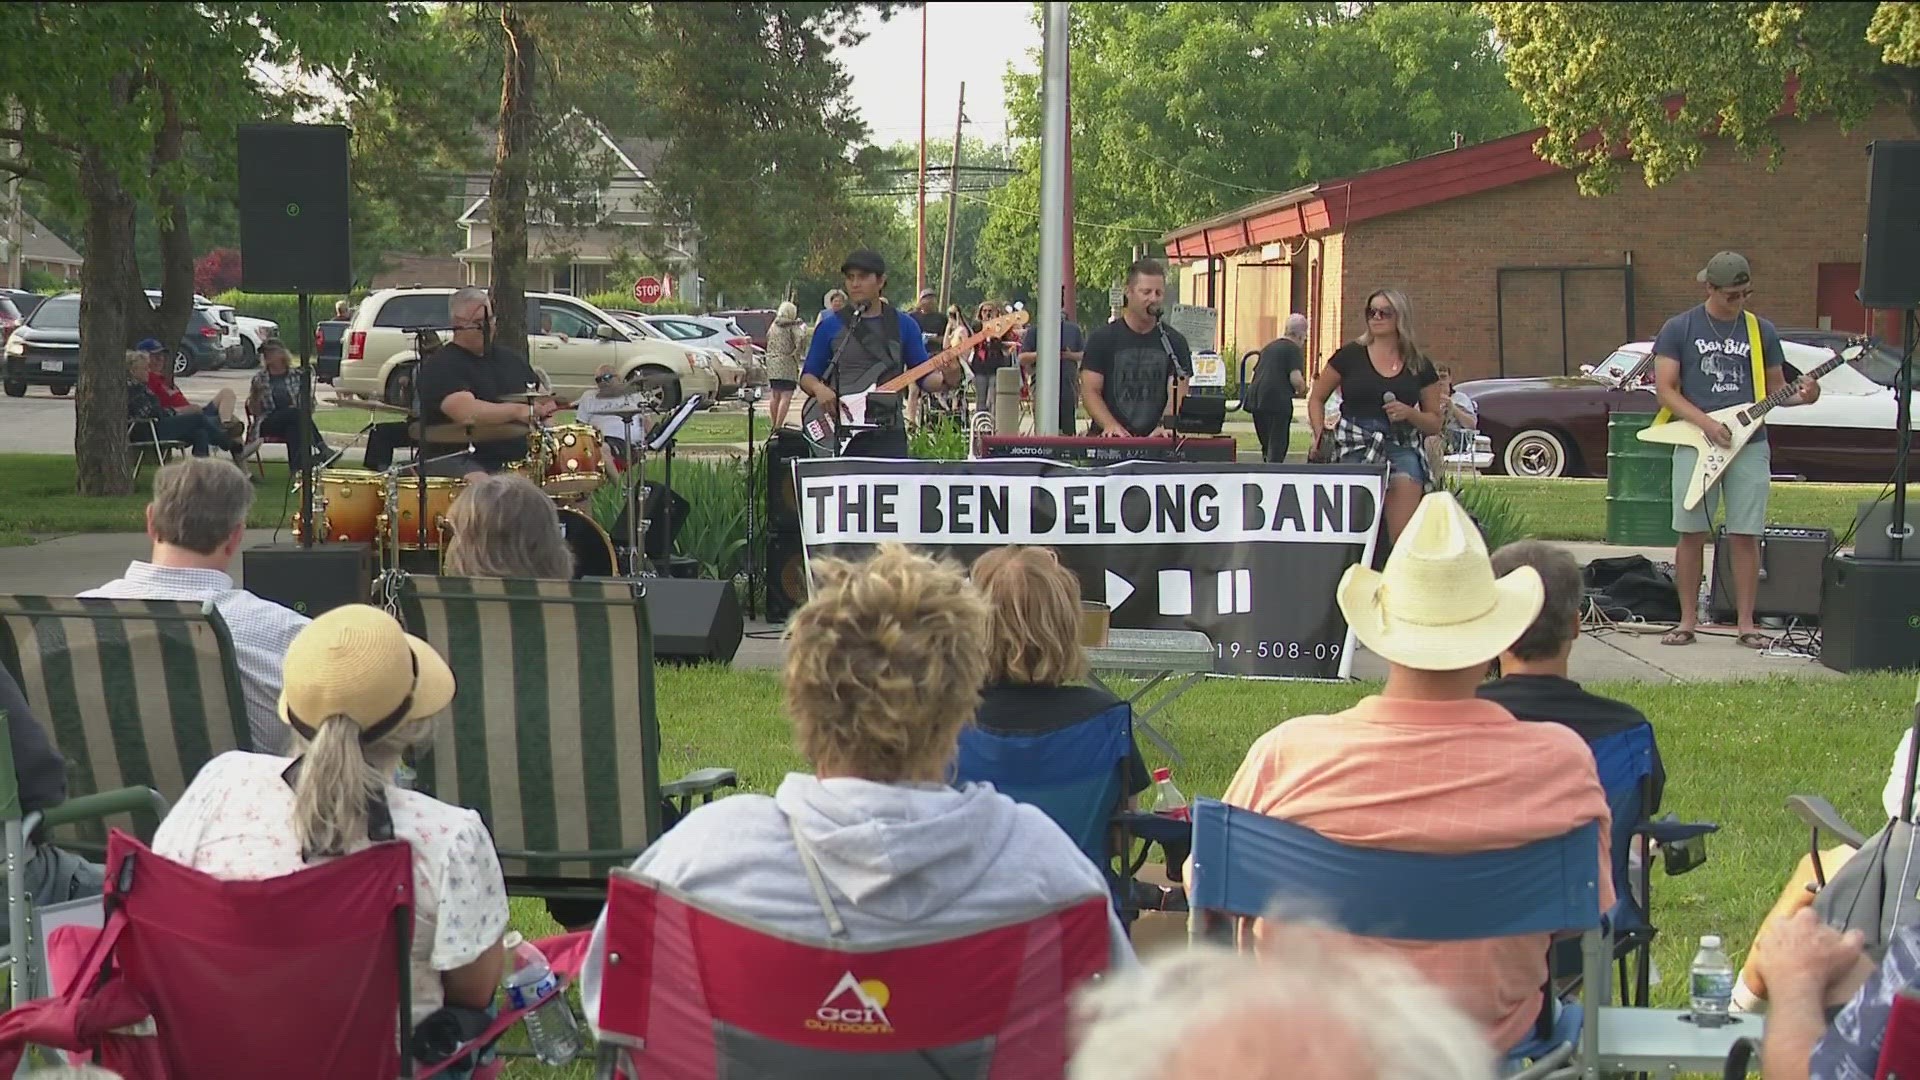 Amid the stress of cleaning up after an EF-2 tornado caused swaths of damage in Point Place on Thursday, the community rewarded itself with a concert Monday night.